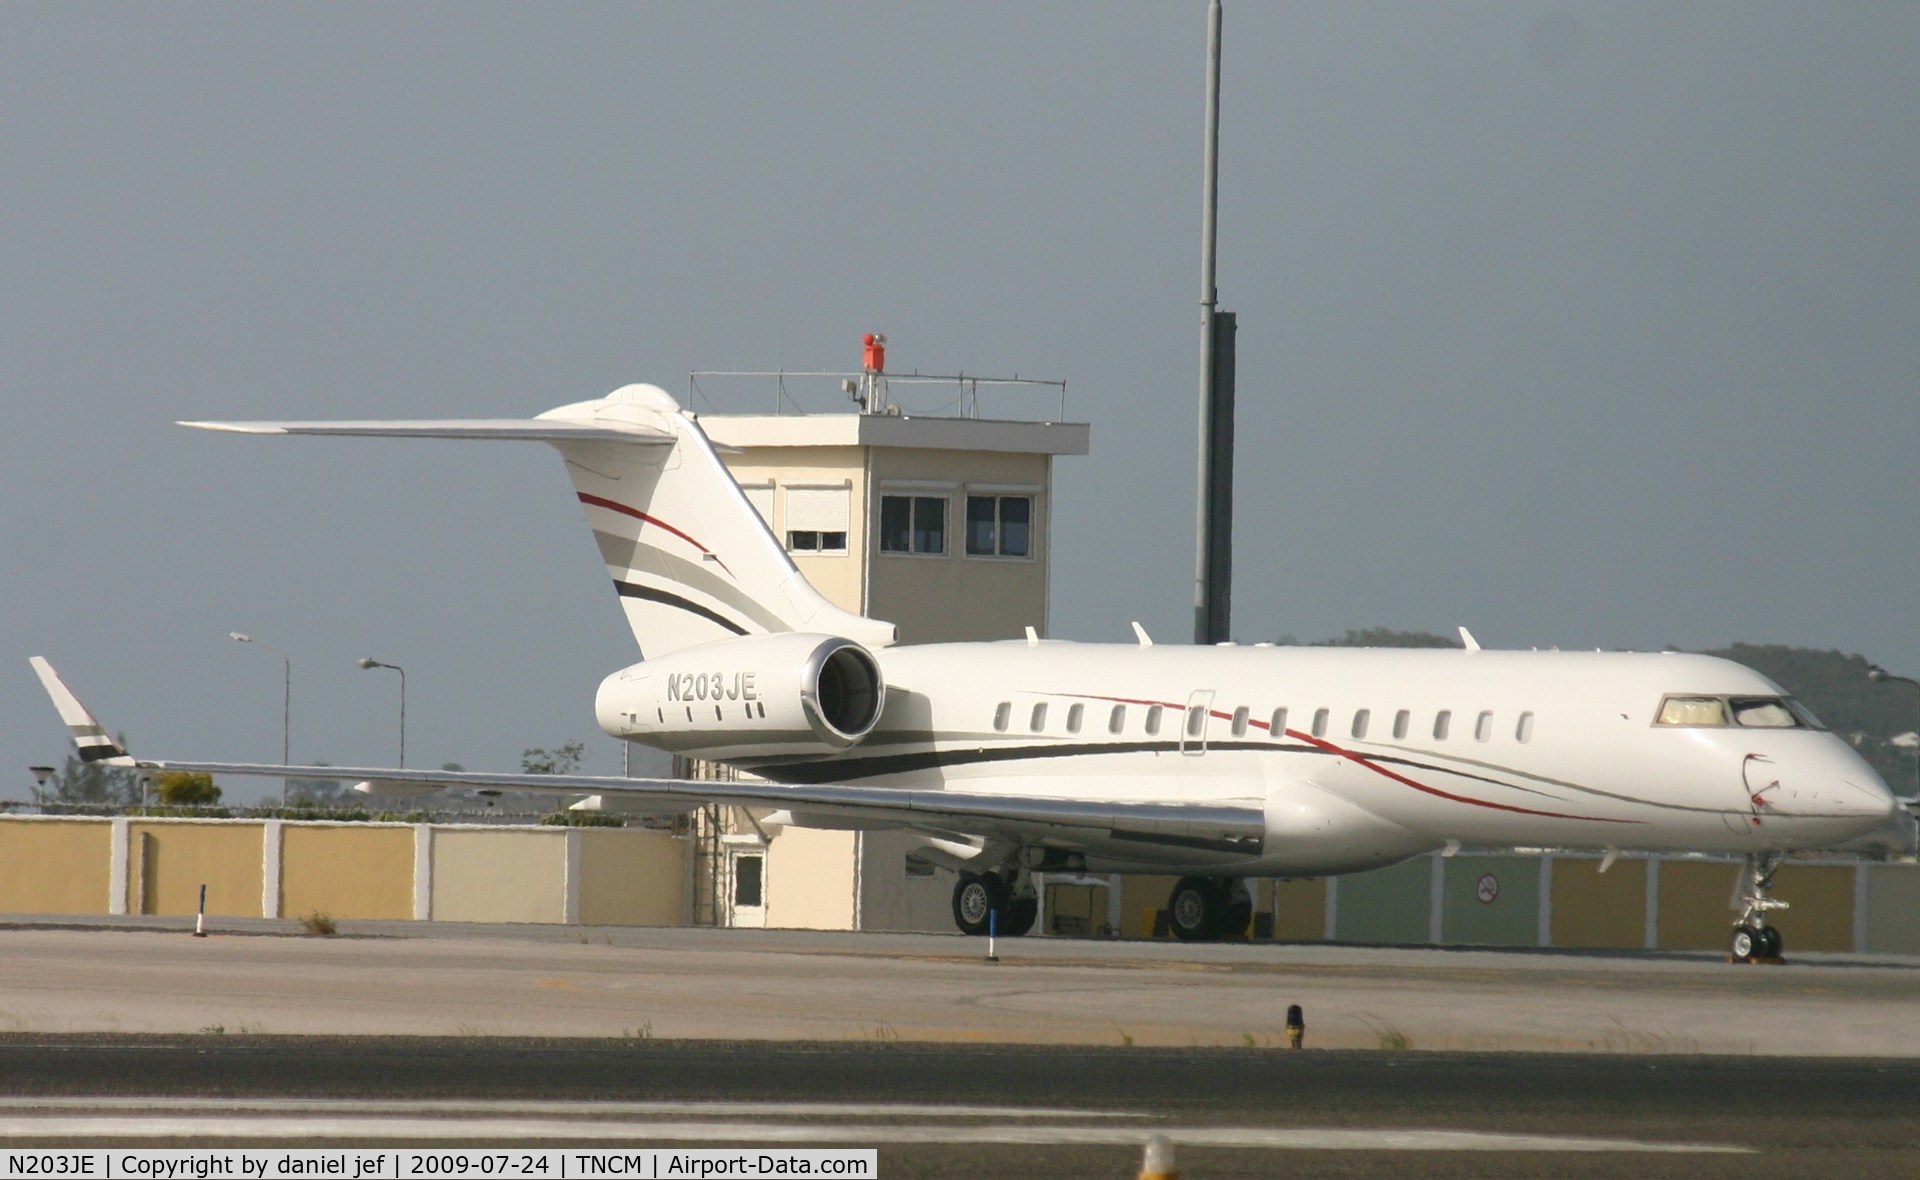 N203JE, 1999 Bombardier BD-700-1A11 Global 5000 C/N 9019, park at the Charly ramp basking in the afternoon sun.